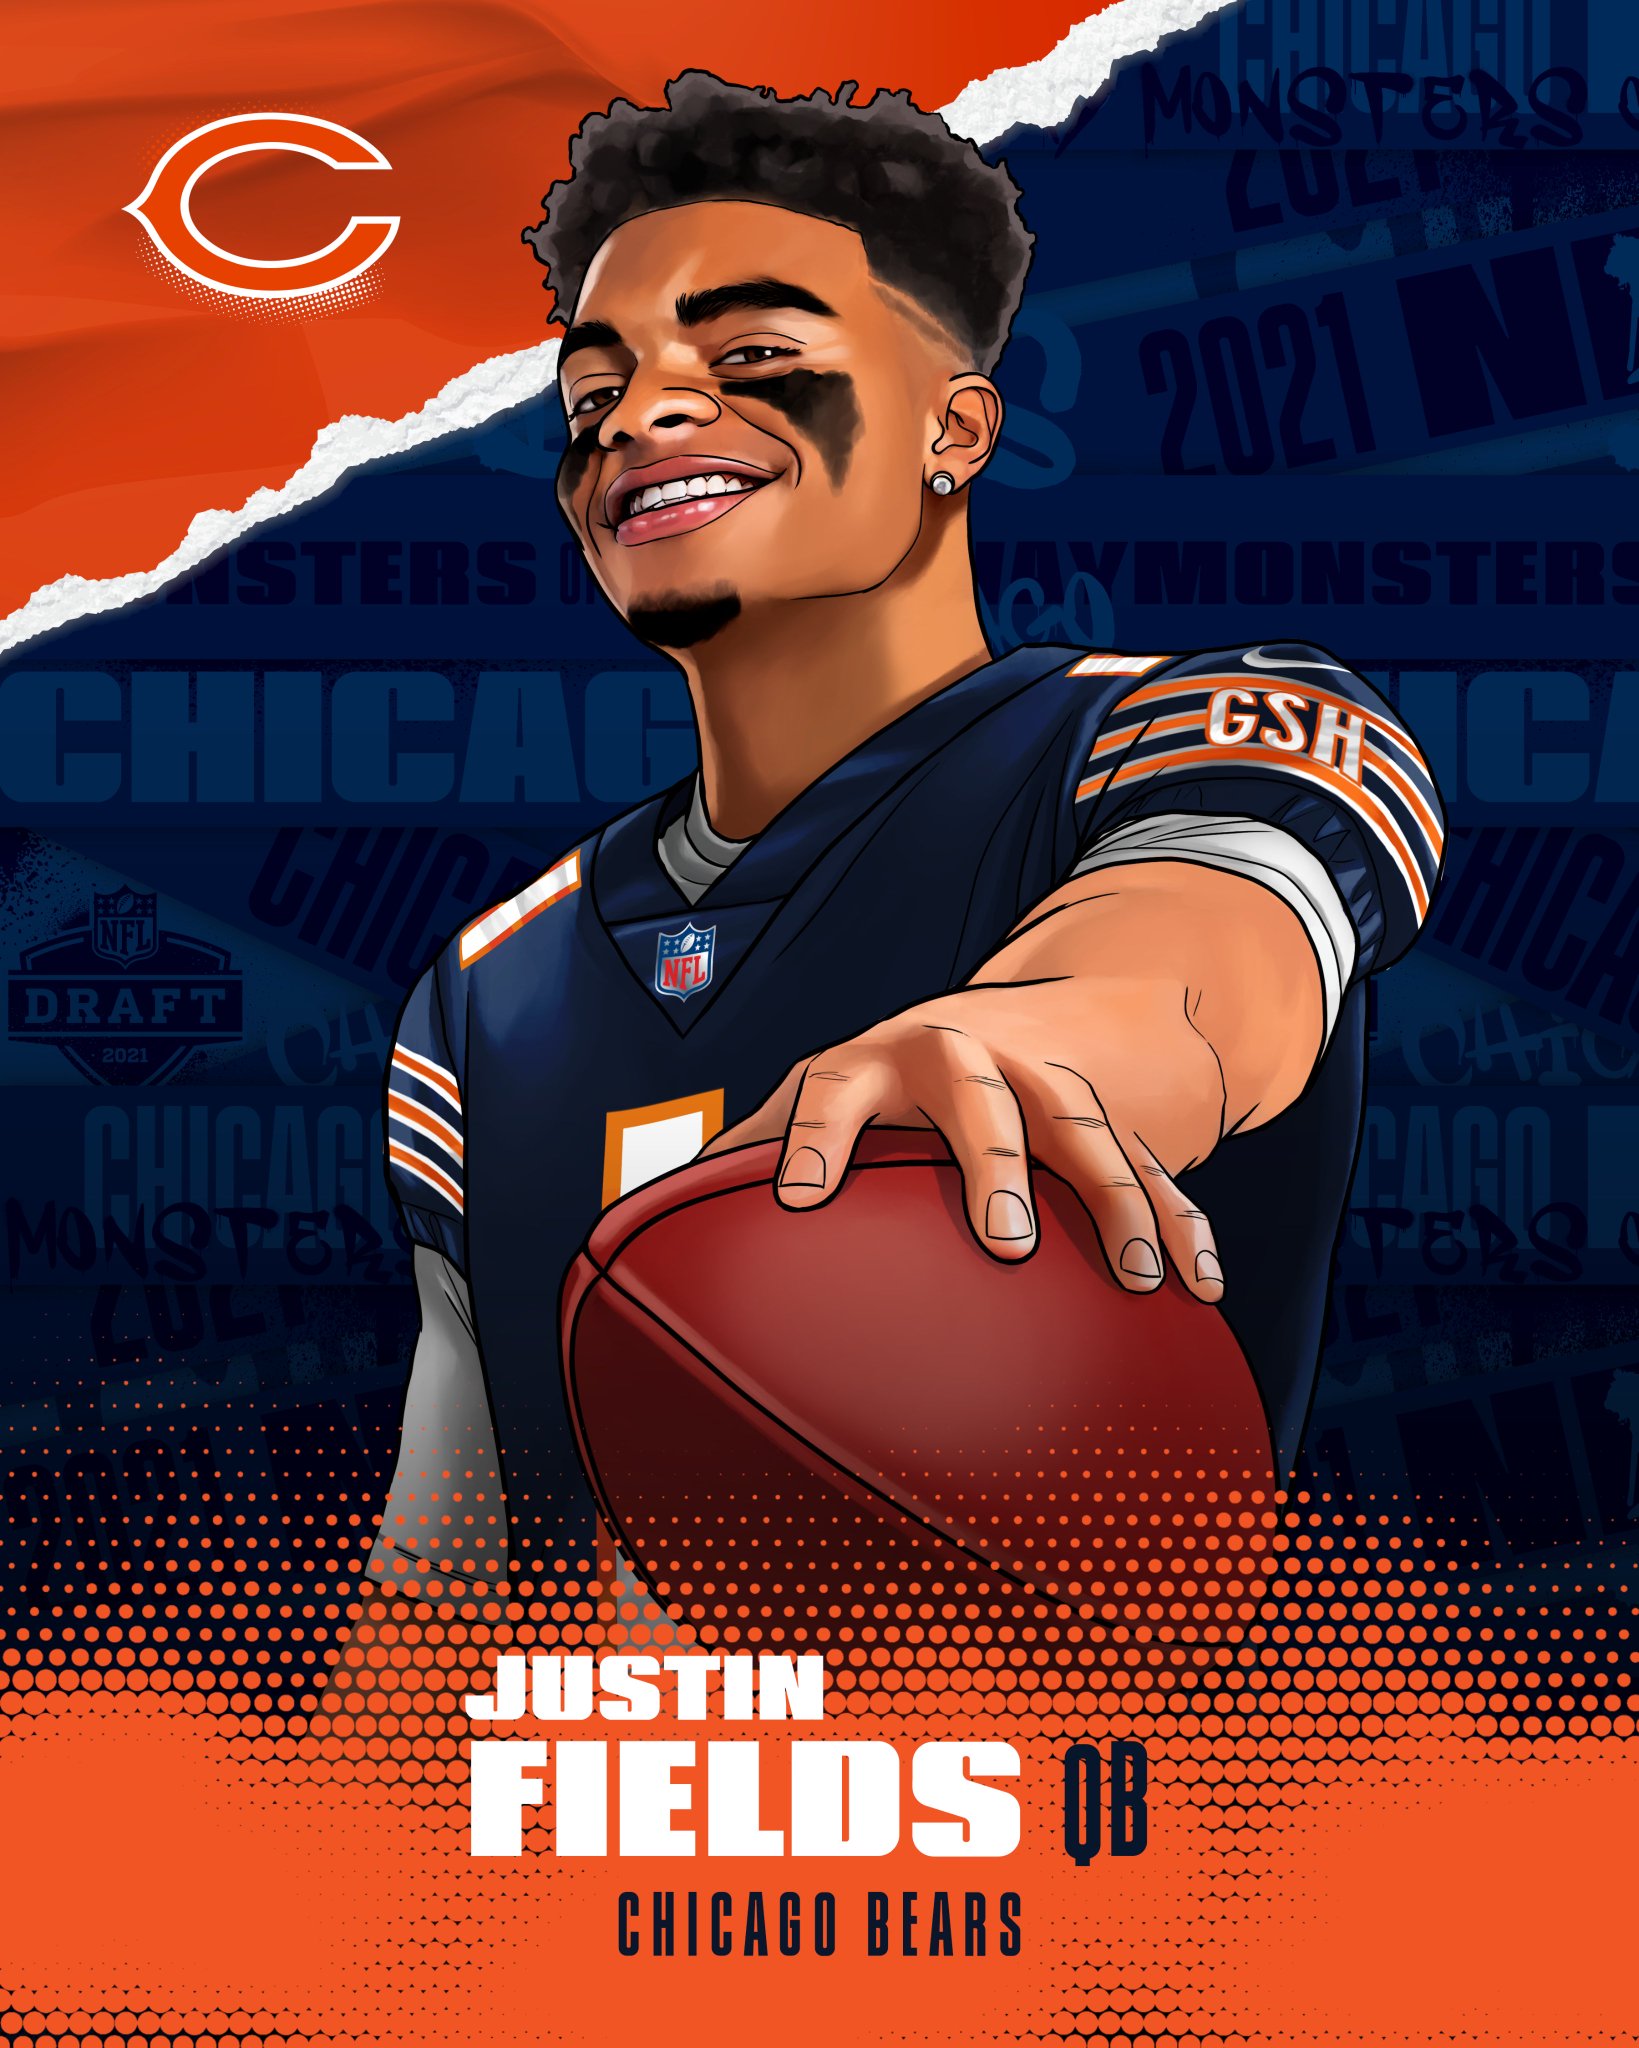 NFL Fields is heading to Chicago! #NFLDraft ChicagoBears